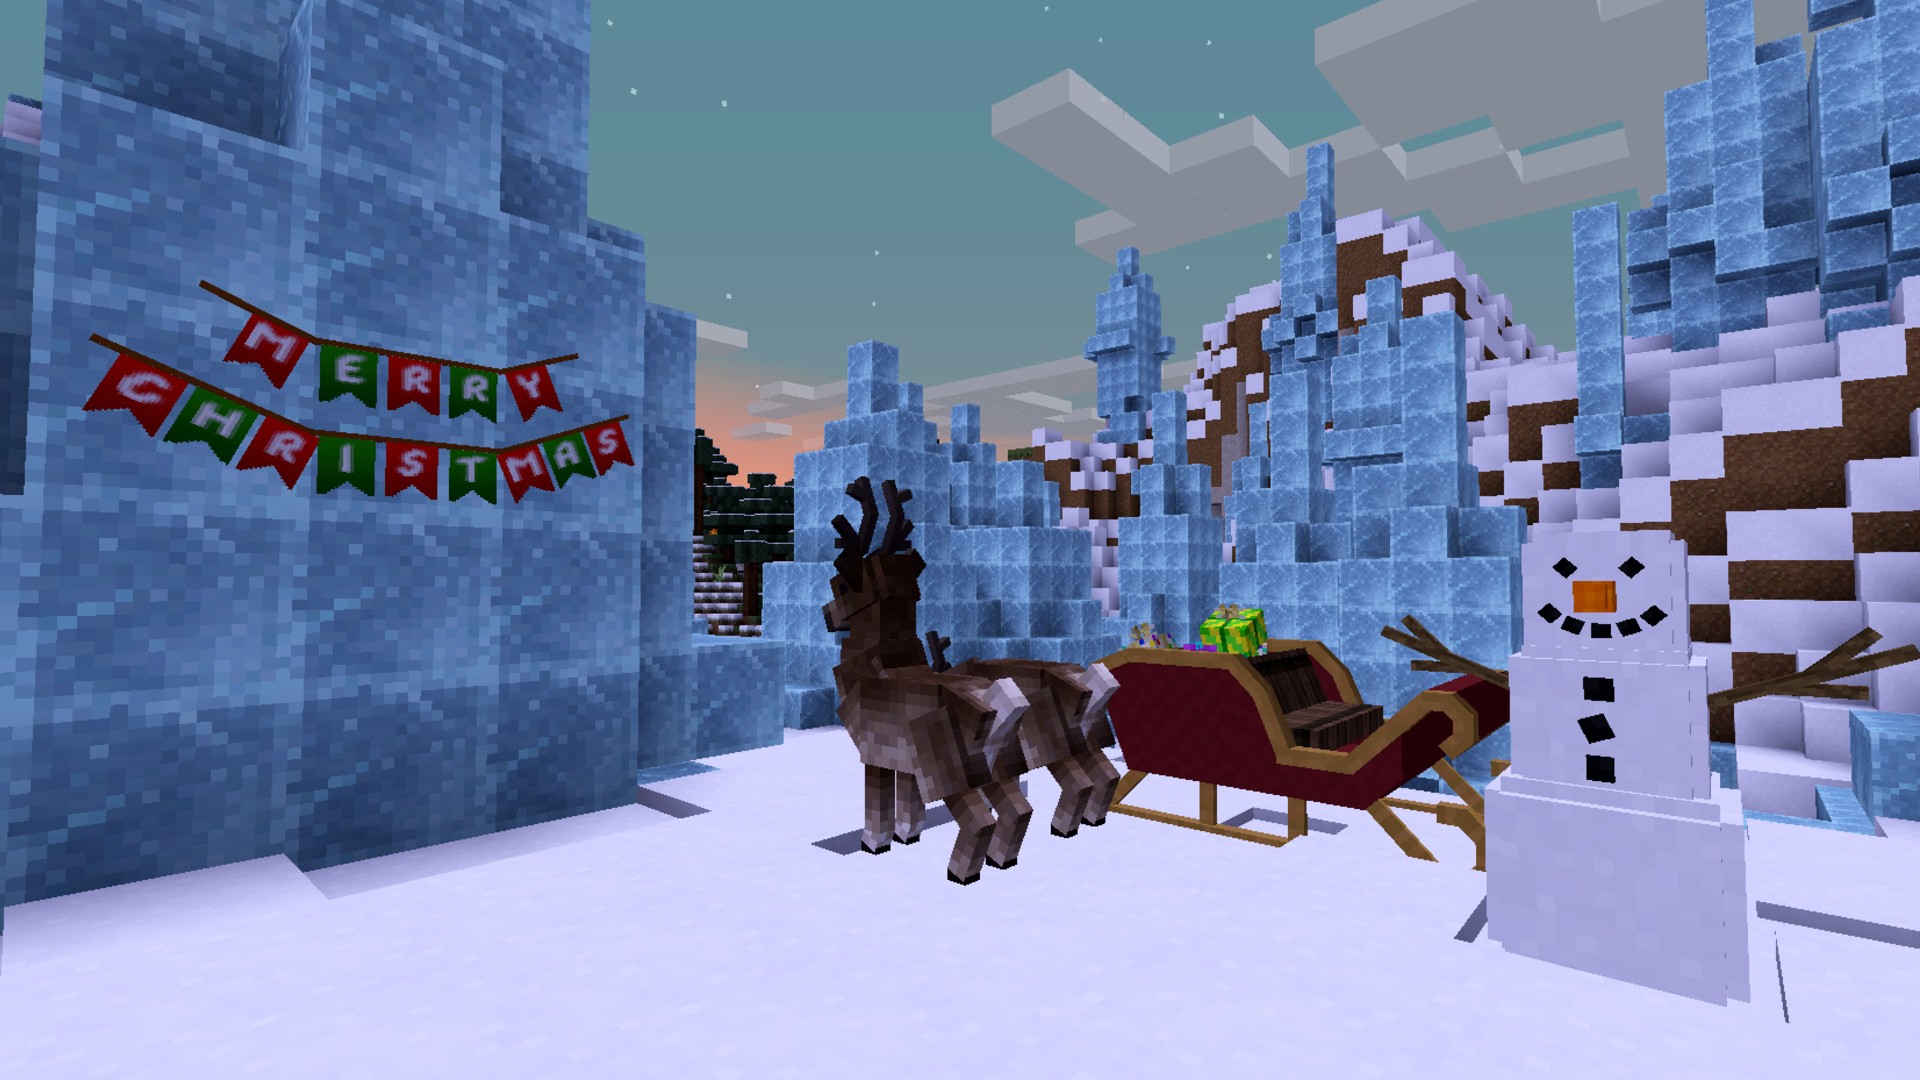 One of the best Minecraft Christmas builds, seeds, skins, and extra